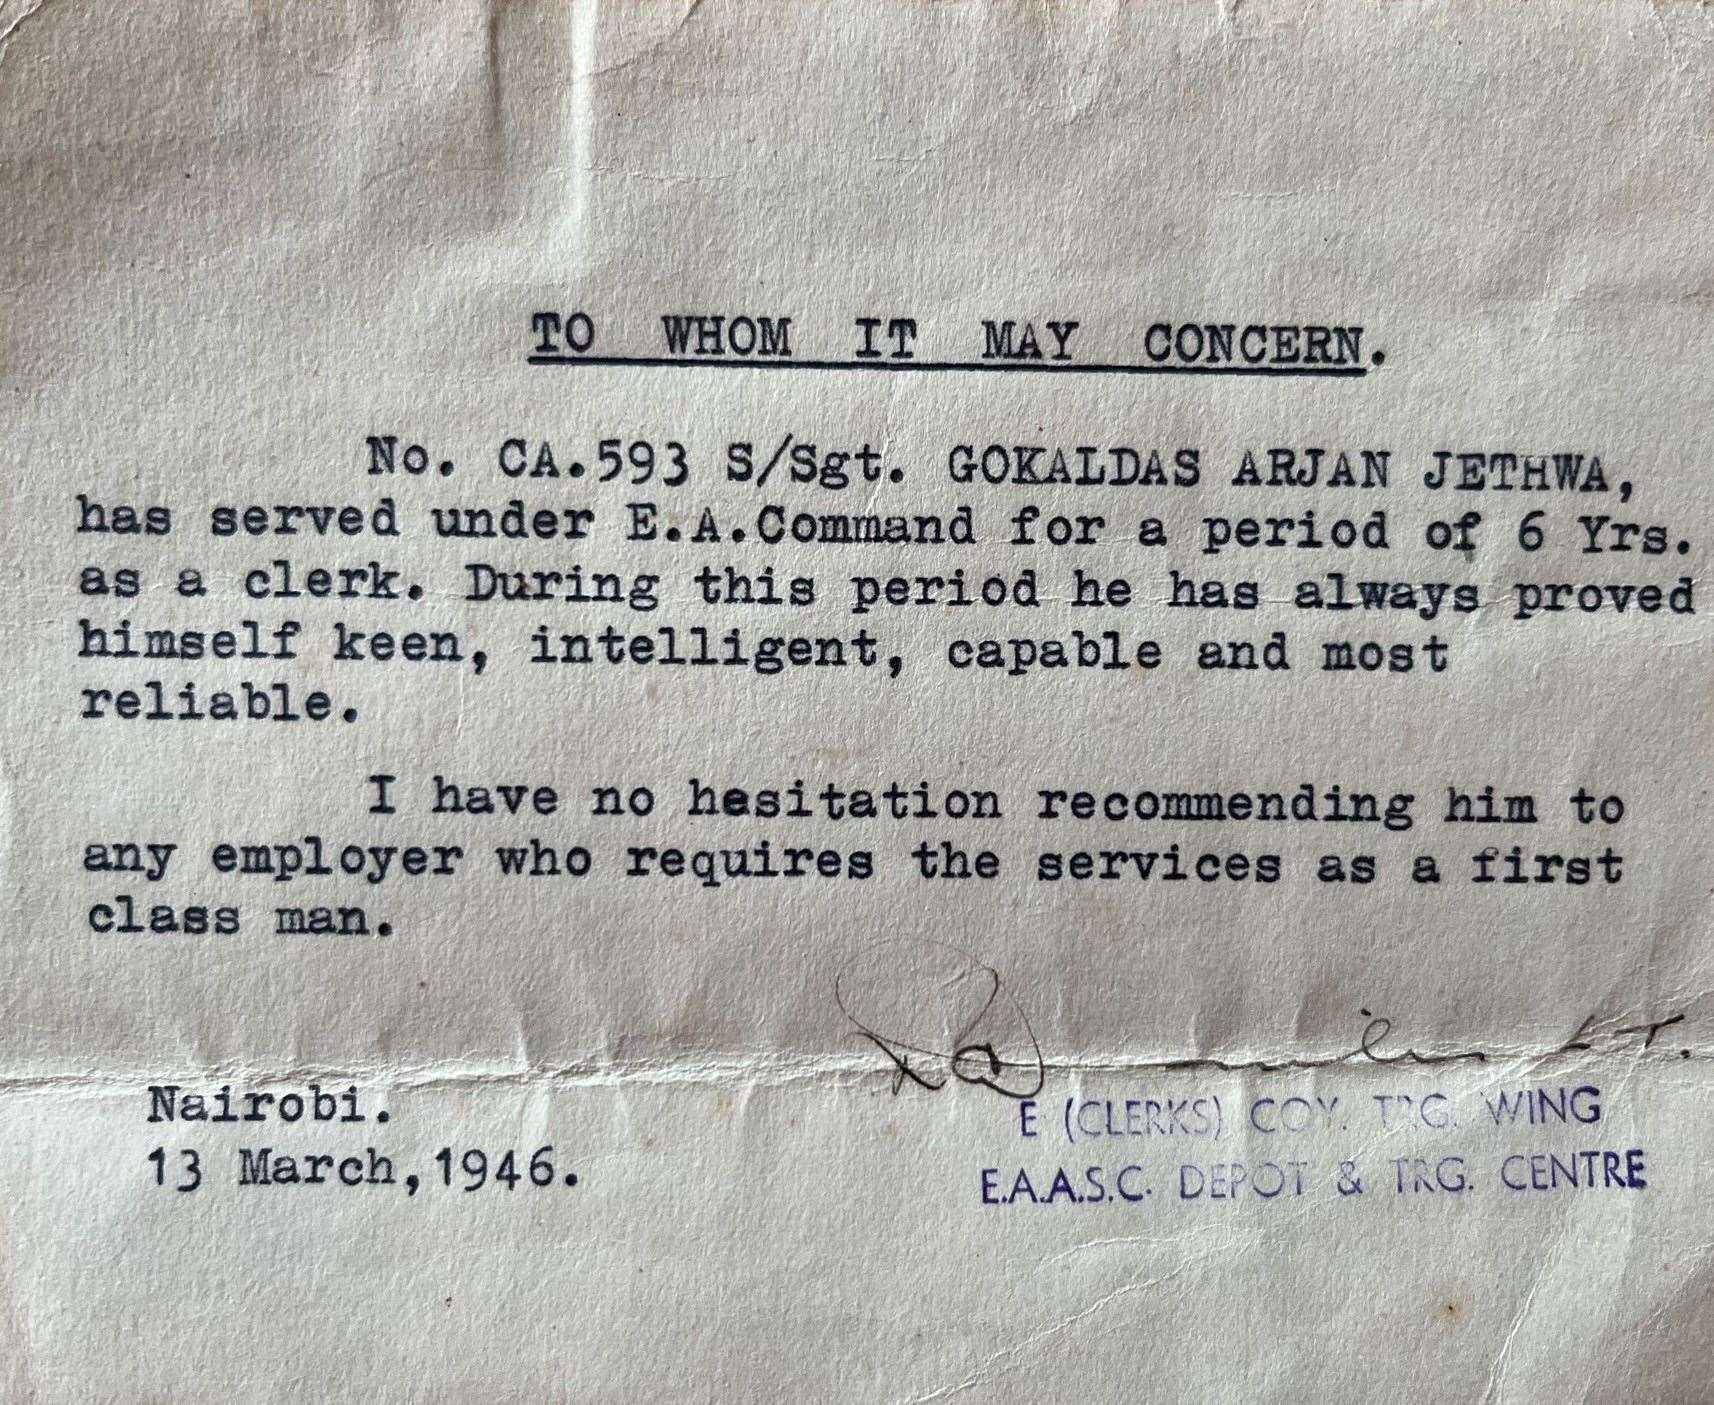 Gokaldas letter of recommendation from the East African military